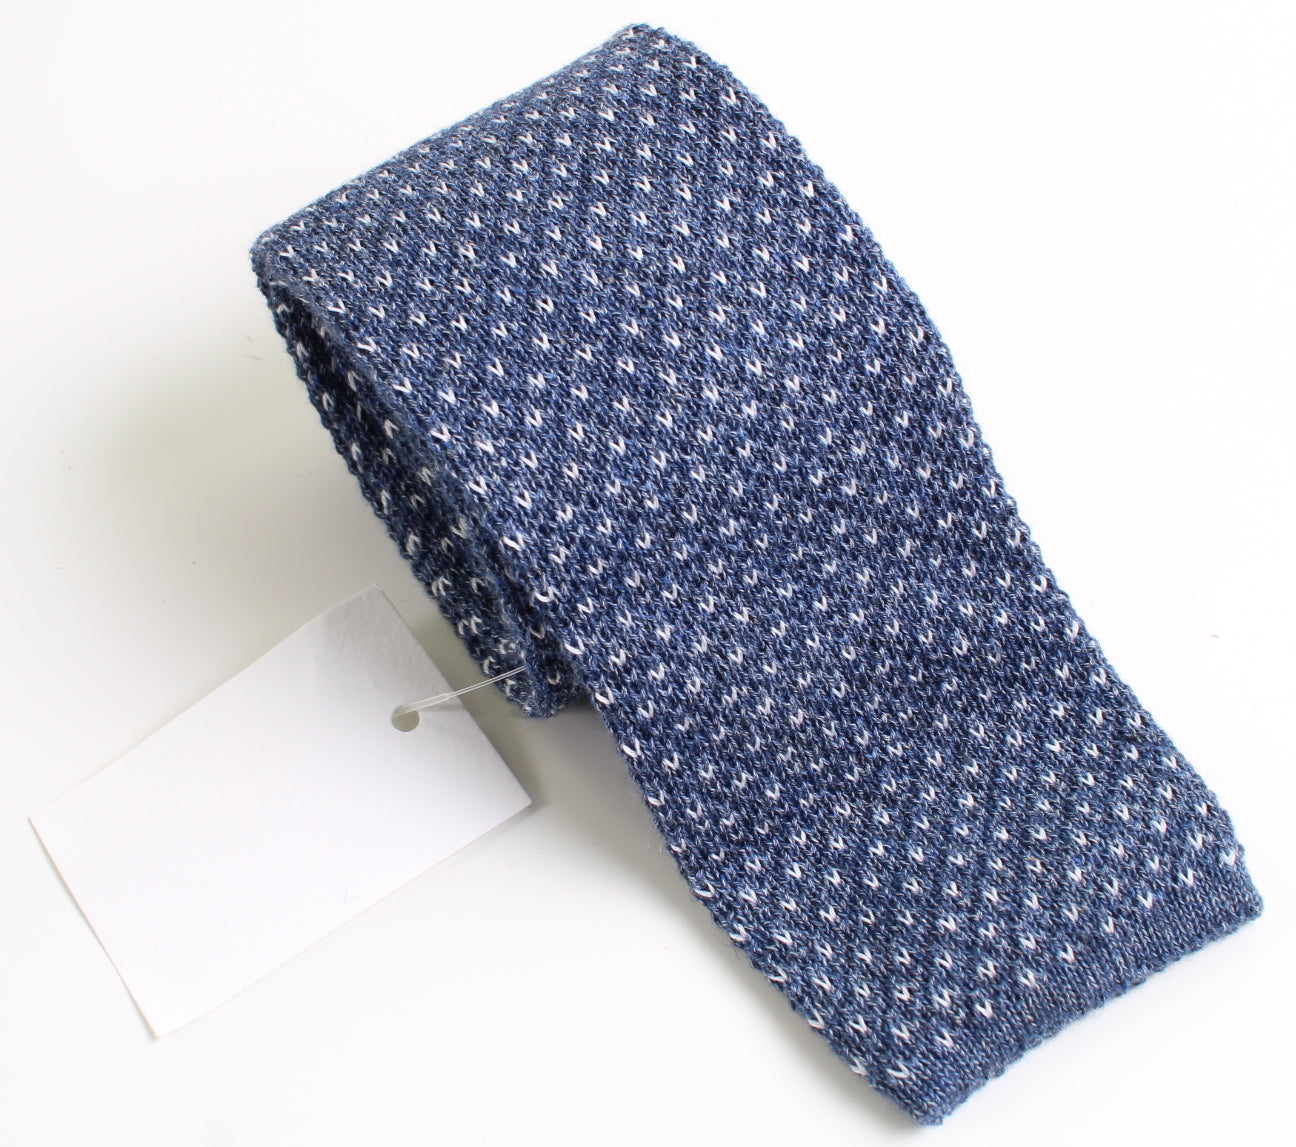 New With Tags SUITSUPPLY Blue Textured 100% Cotton Knit Tie